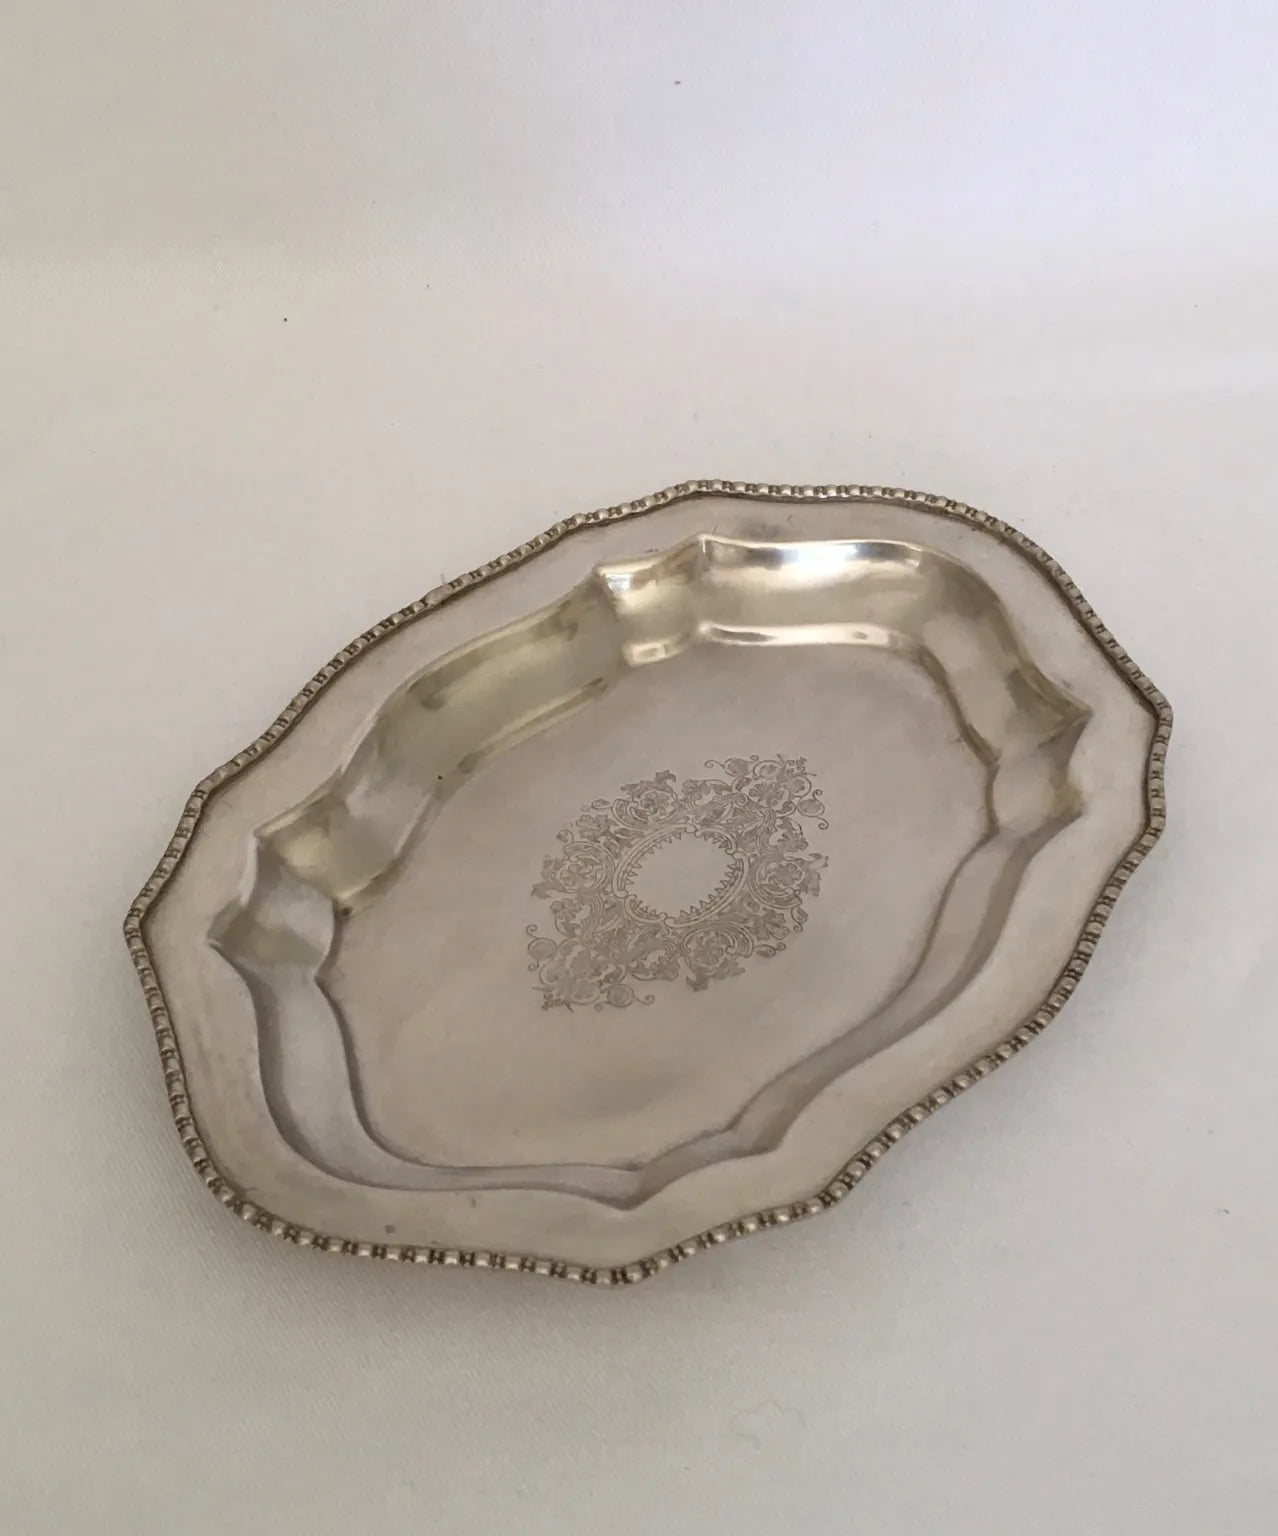 French Crest Tray